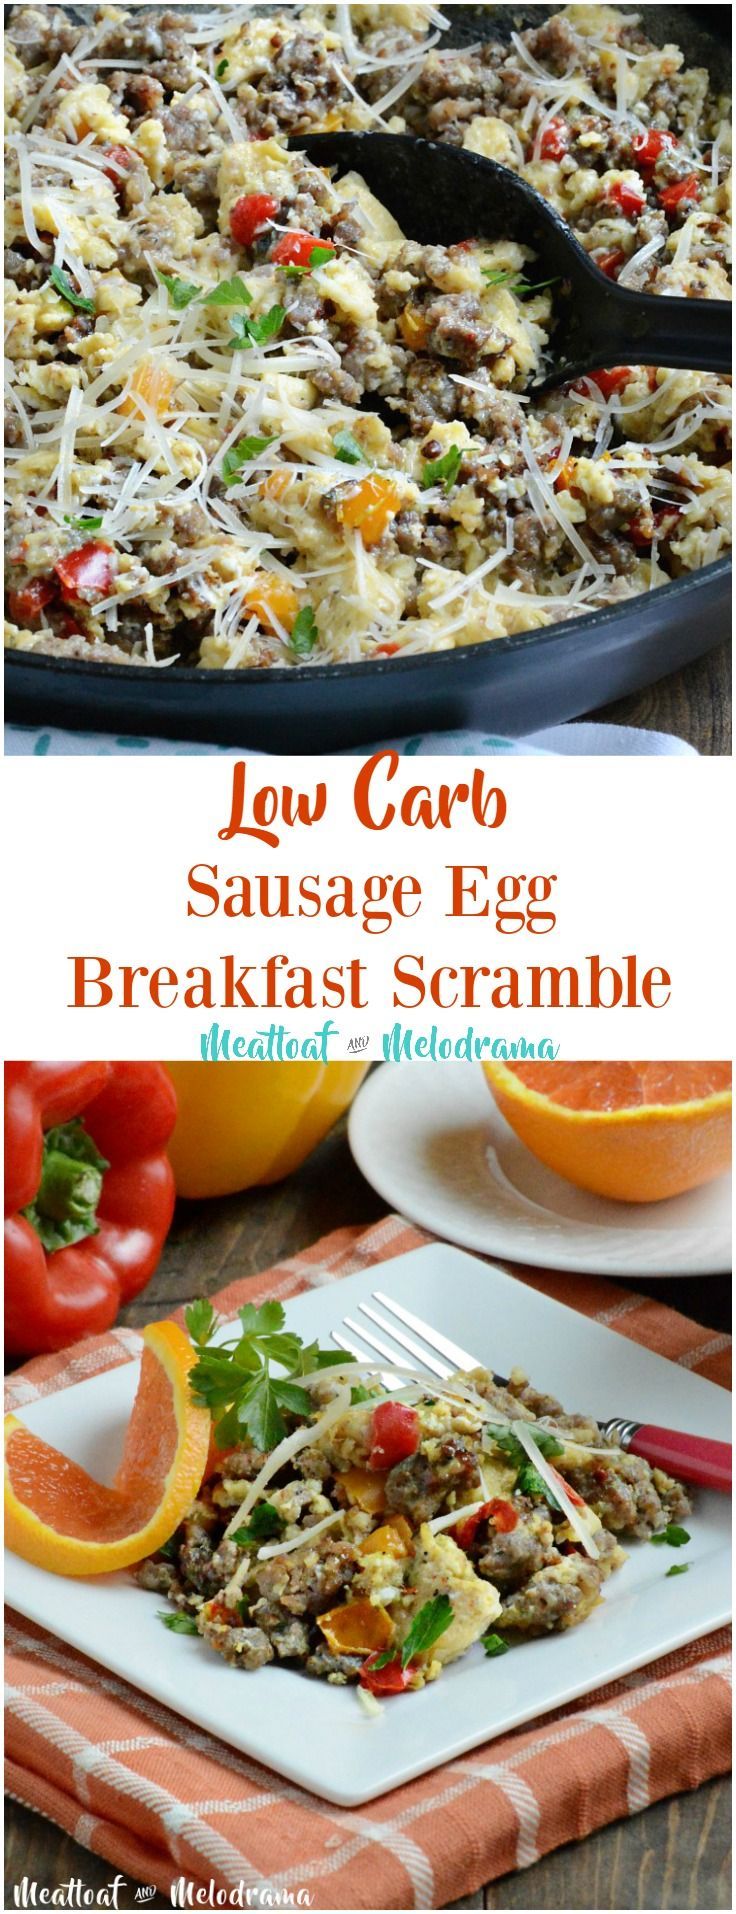 Low Carb Sausage Egg Breakfast Scramble - Quick and easy gluten free breakfast skillet with peppers and cheese added in. From Meatloaf and Melodrama -   23 fast diet breakfast
 ideas